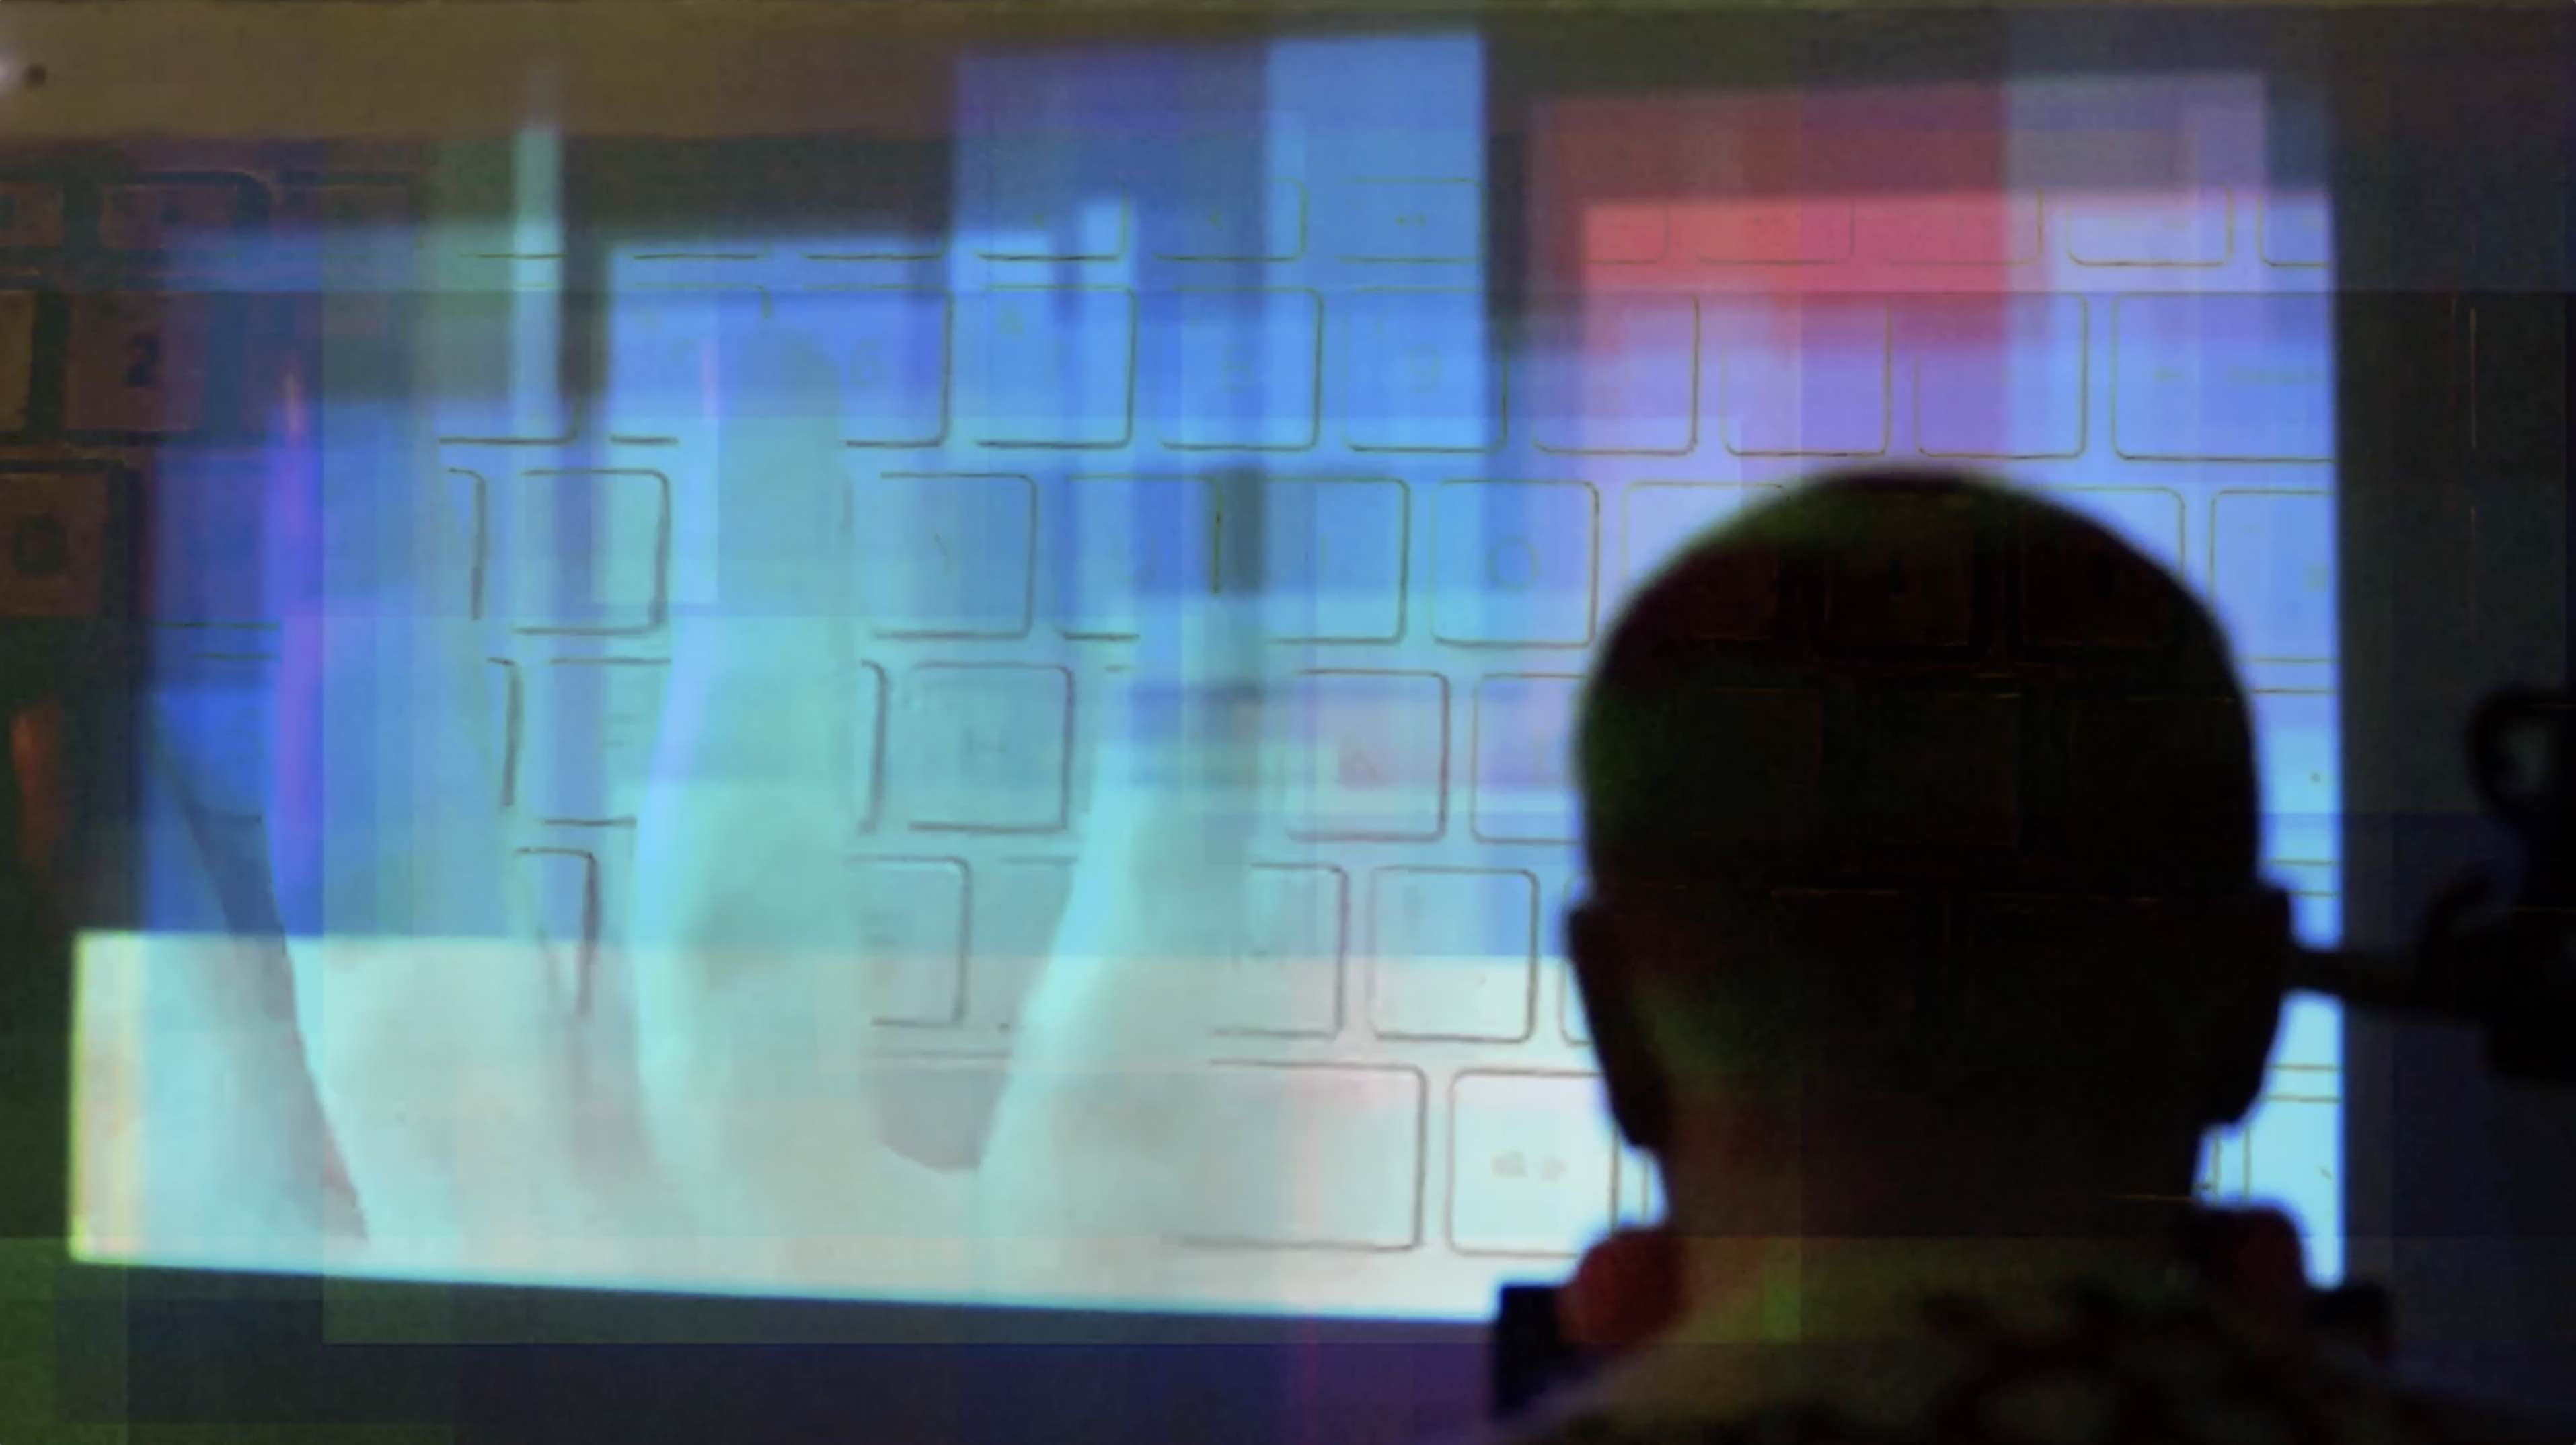 BA Fine Art video by weewaawoowee showing layered footage of coding and film.